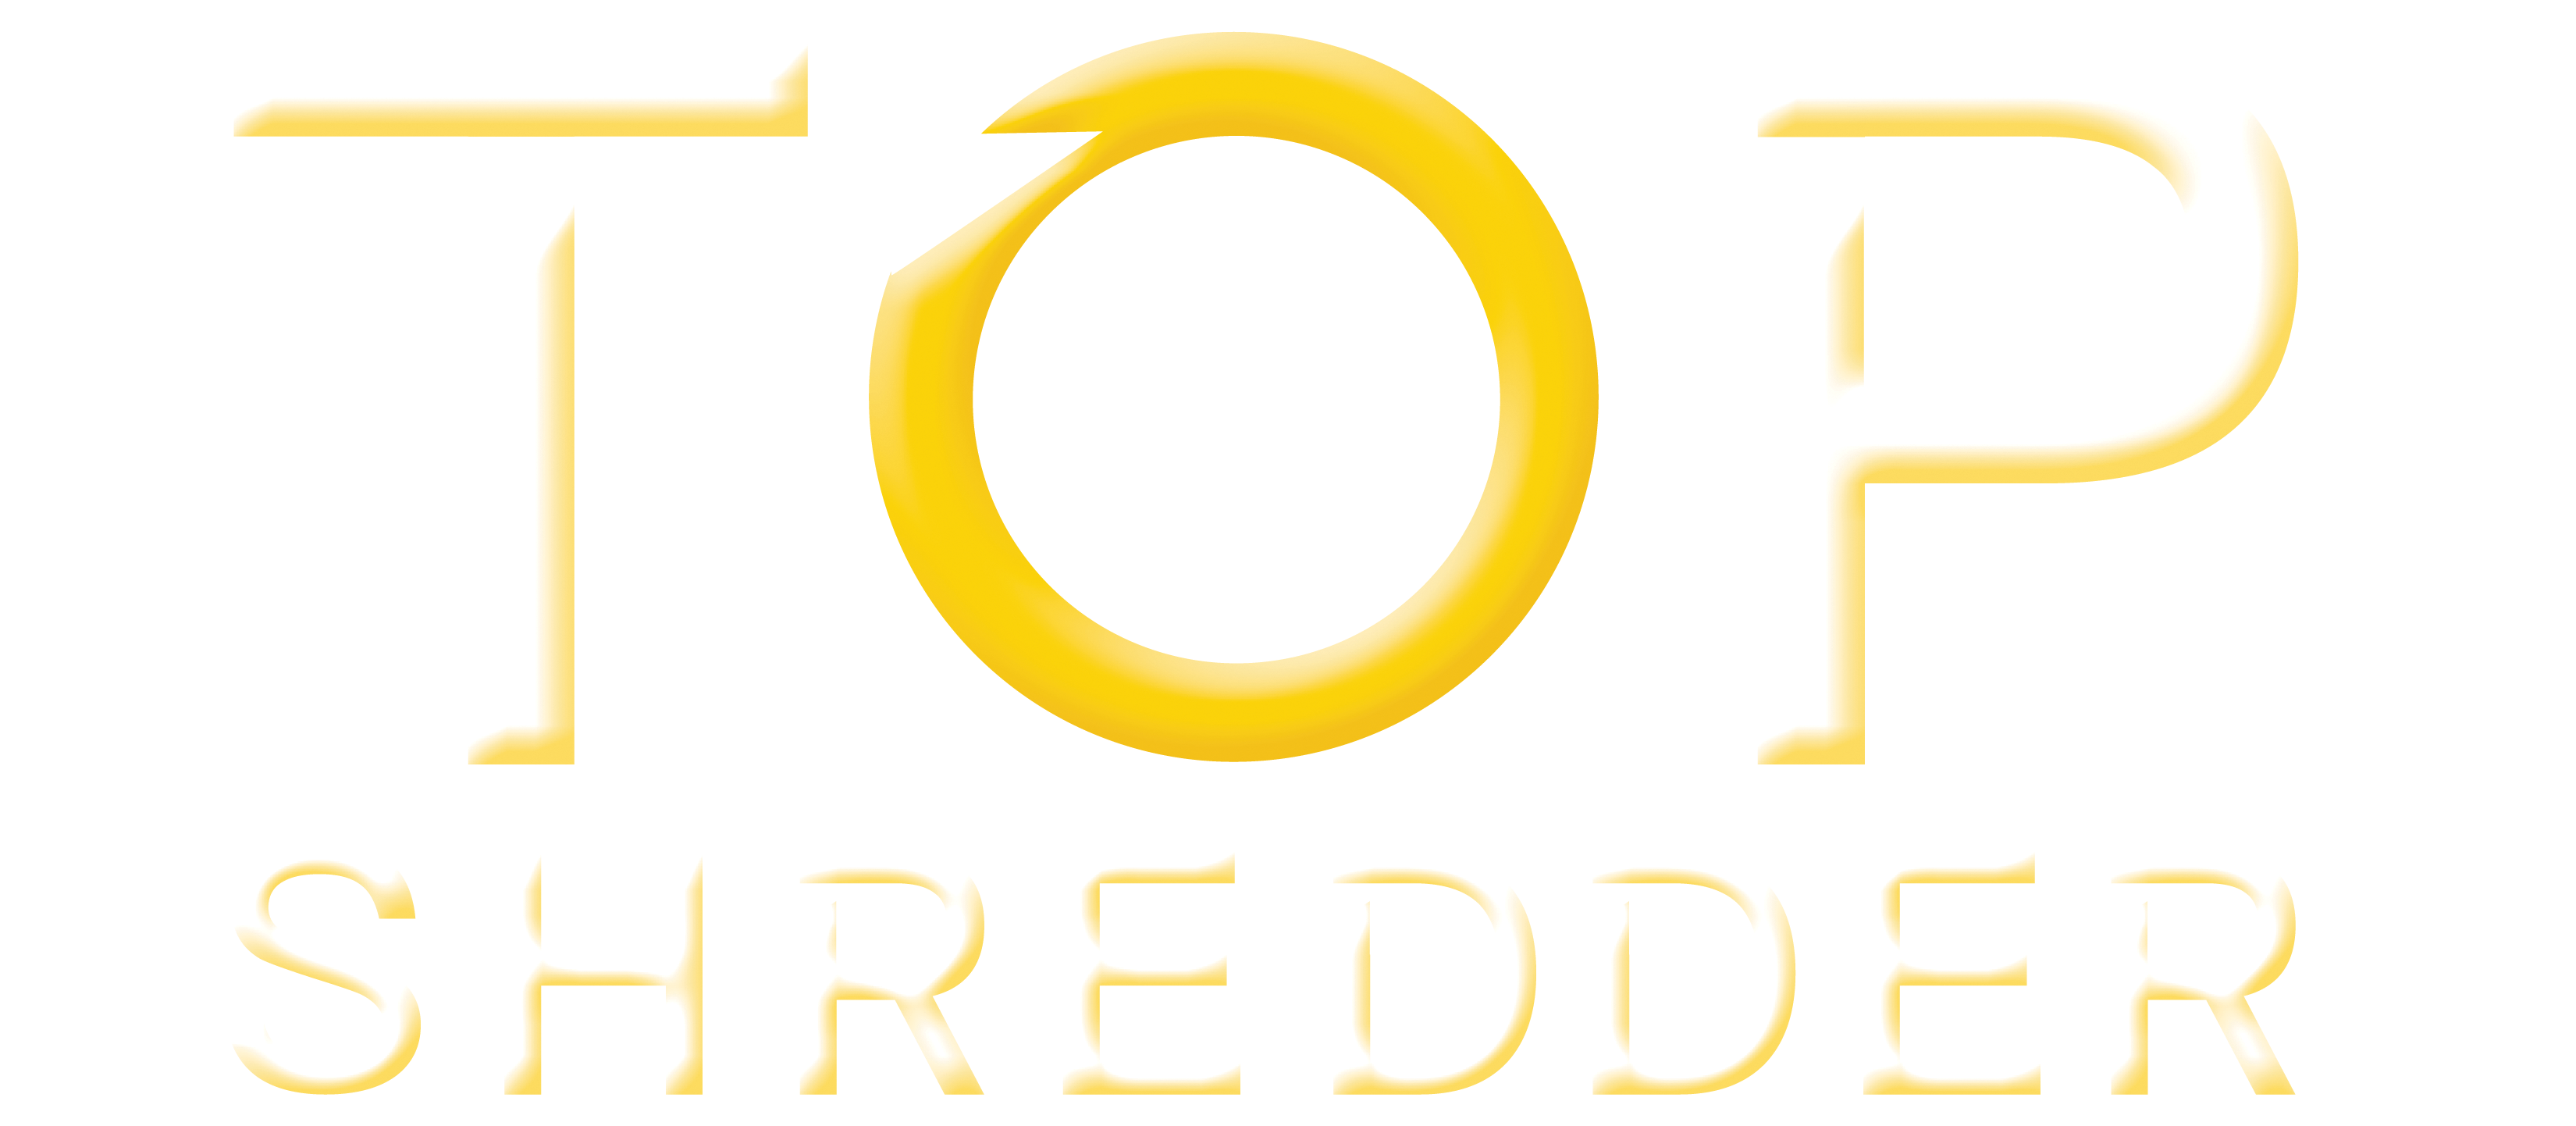 https://www.cheesegratershredder.net/wp-content/uploads/2023/01/cropped-TS_Wordmark_RGB_colorbg-copy.png